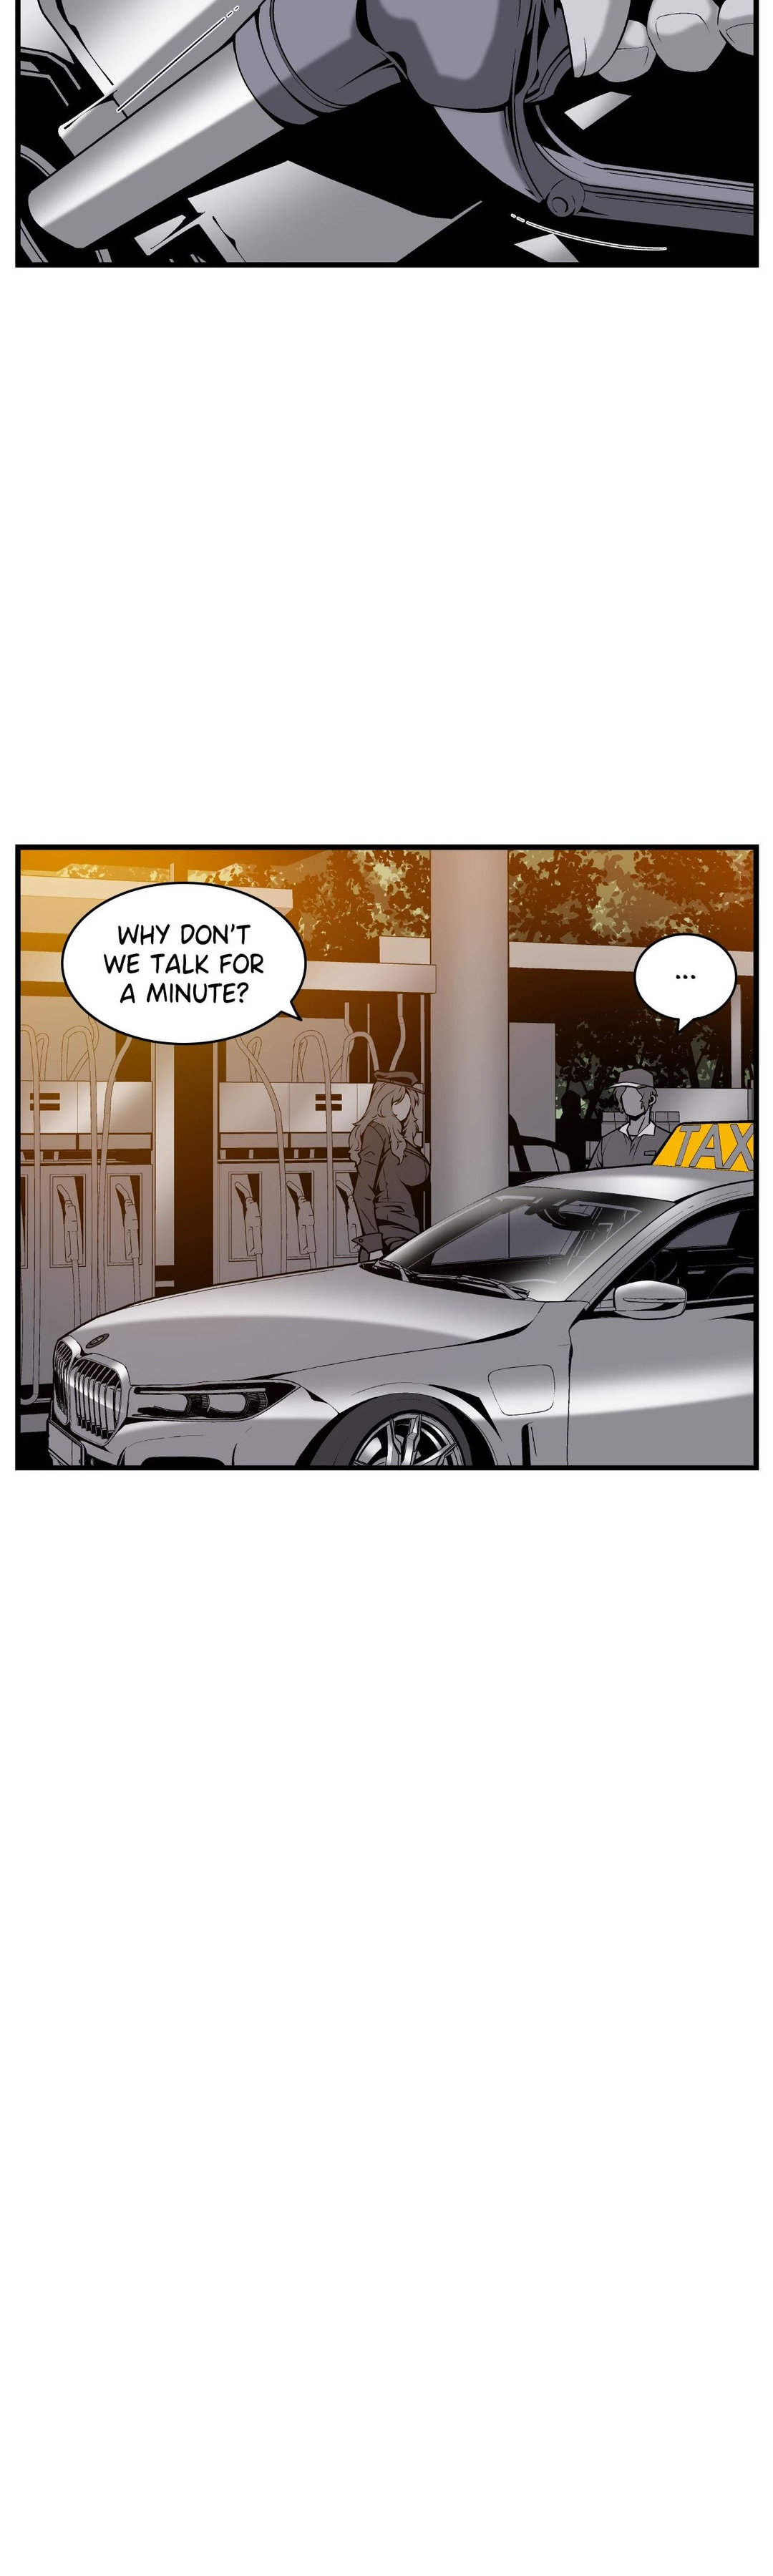 Midnight Taxi - Chapter 21 Page 2